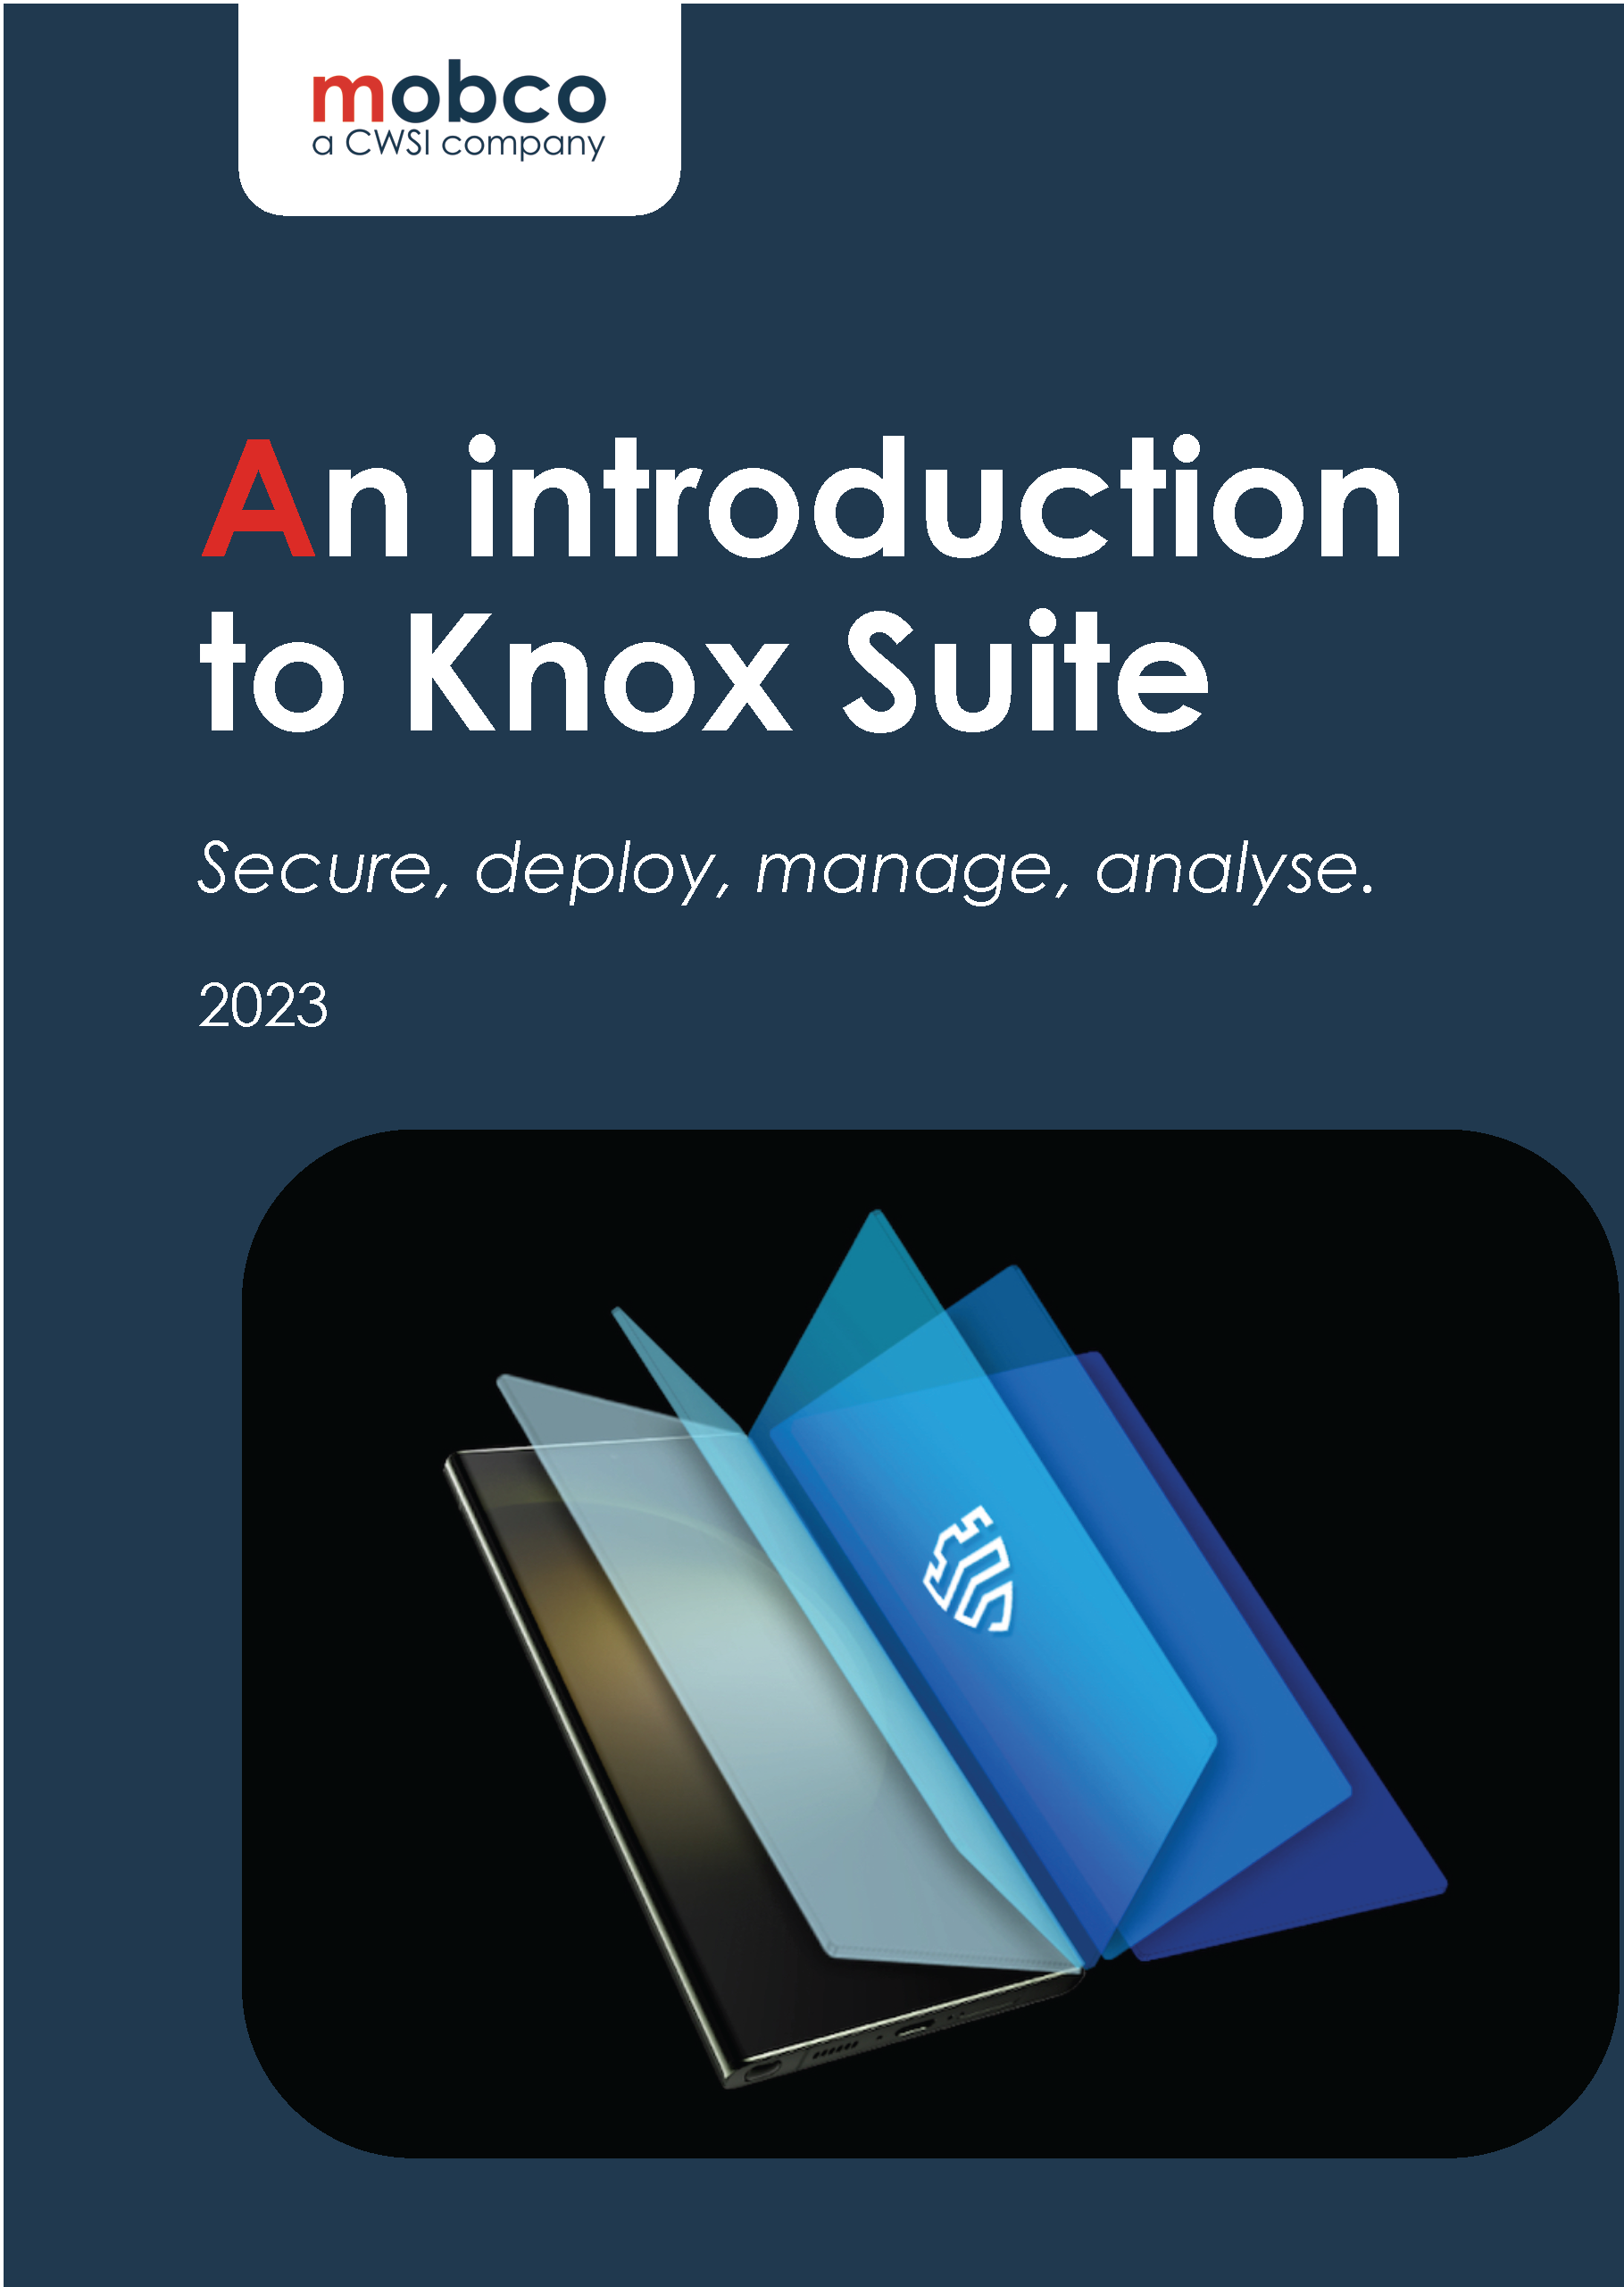 mobco's An Introduction To Knox Suite white paper